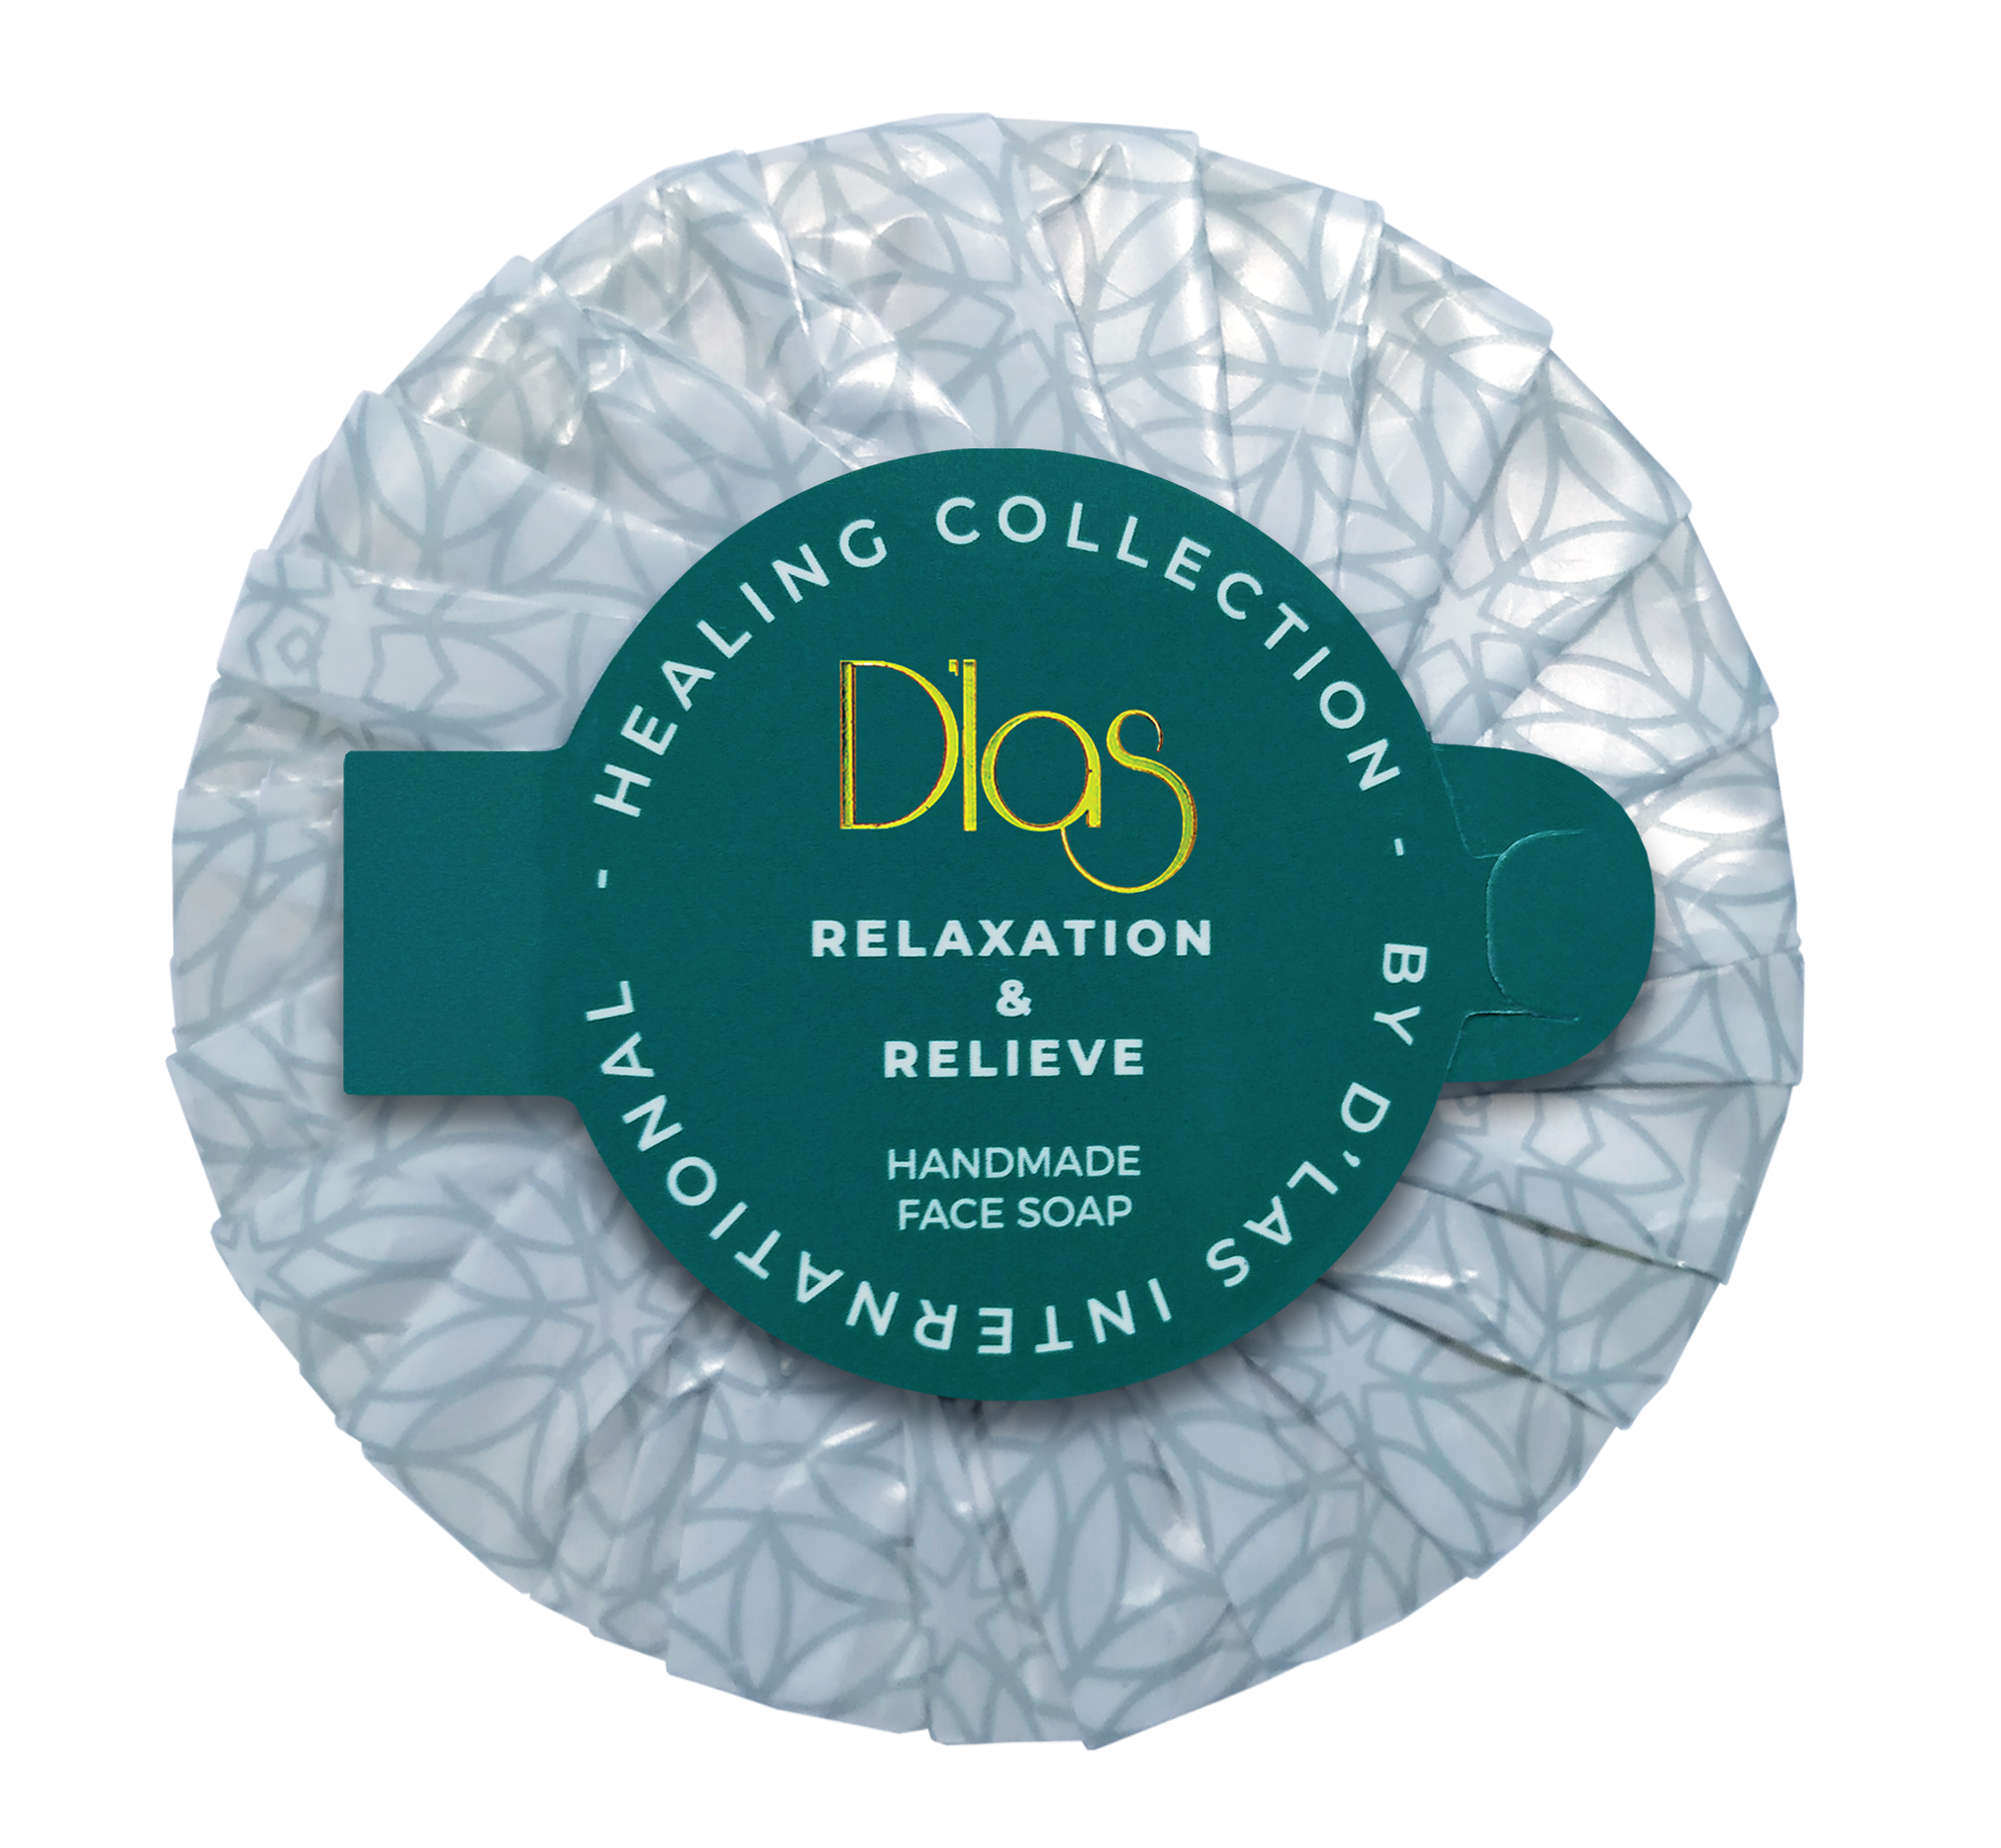 Relaxation & Relieve Handmade Face Soap